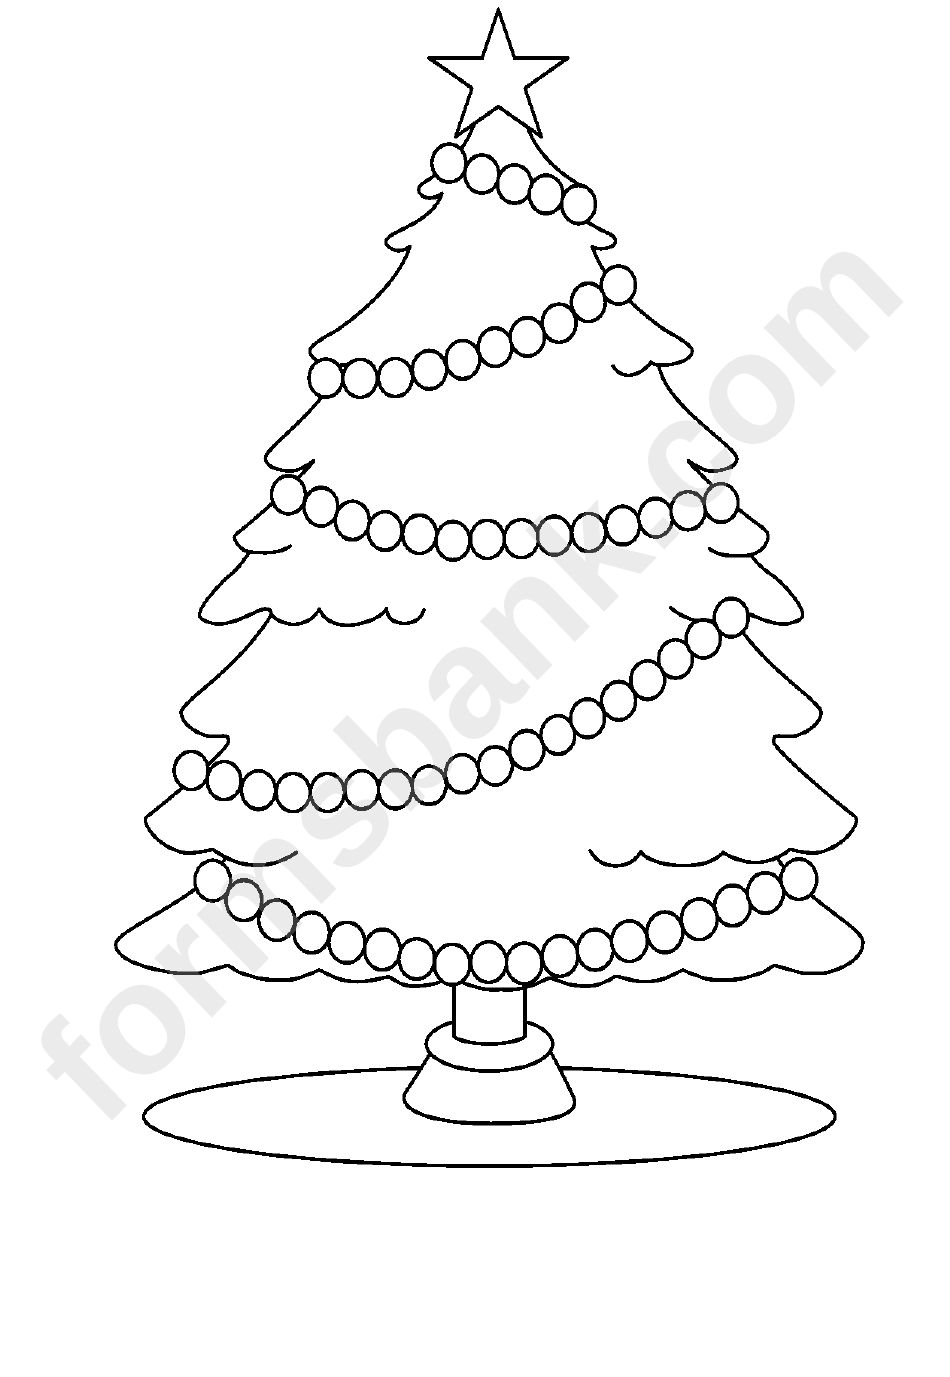 Christmas Tree And Decorations Coloring Sheets